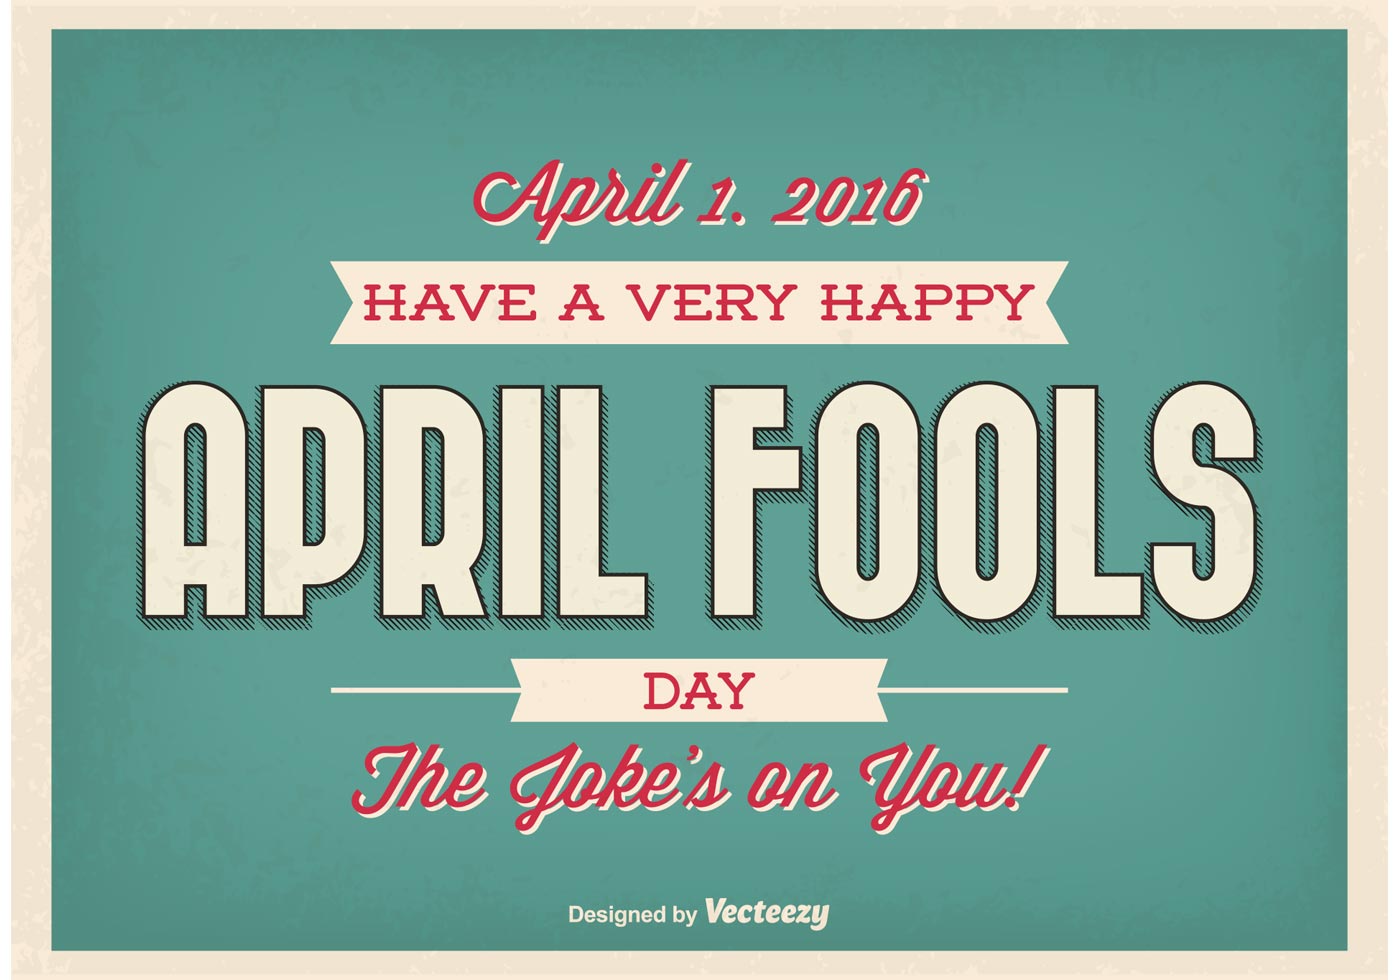 5 Brilliant April Fools Day Pranks Depicted Throughout History